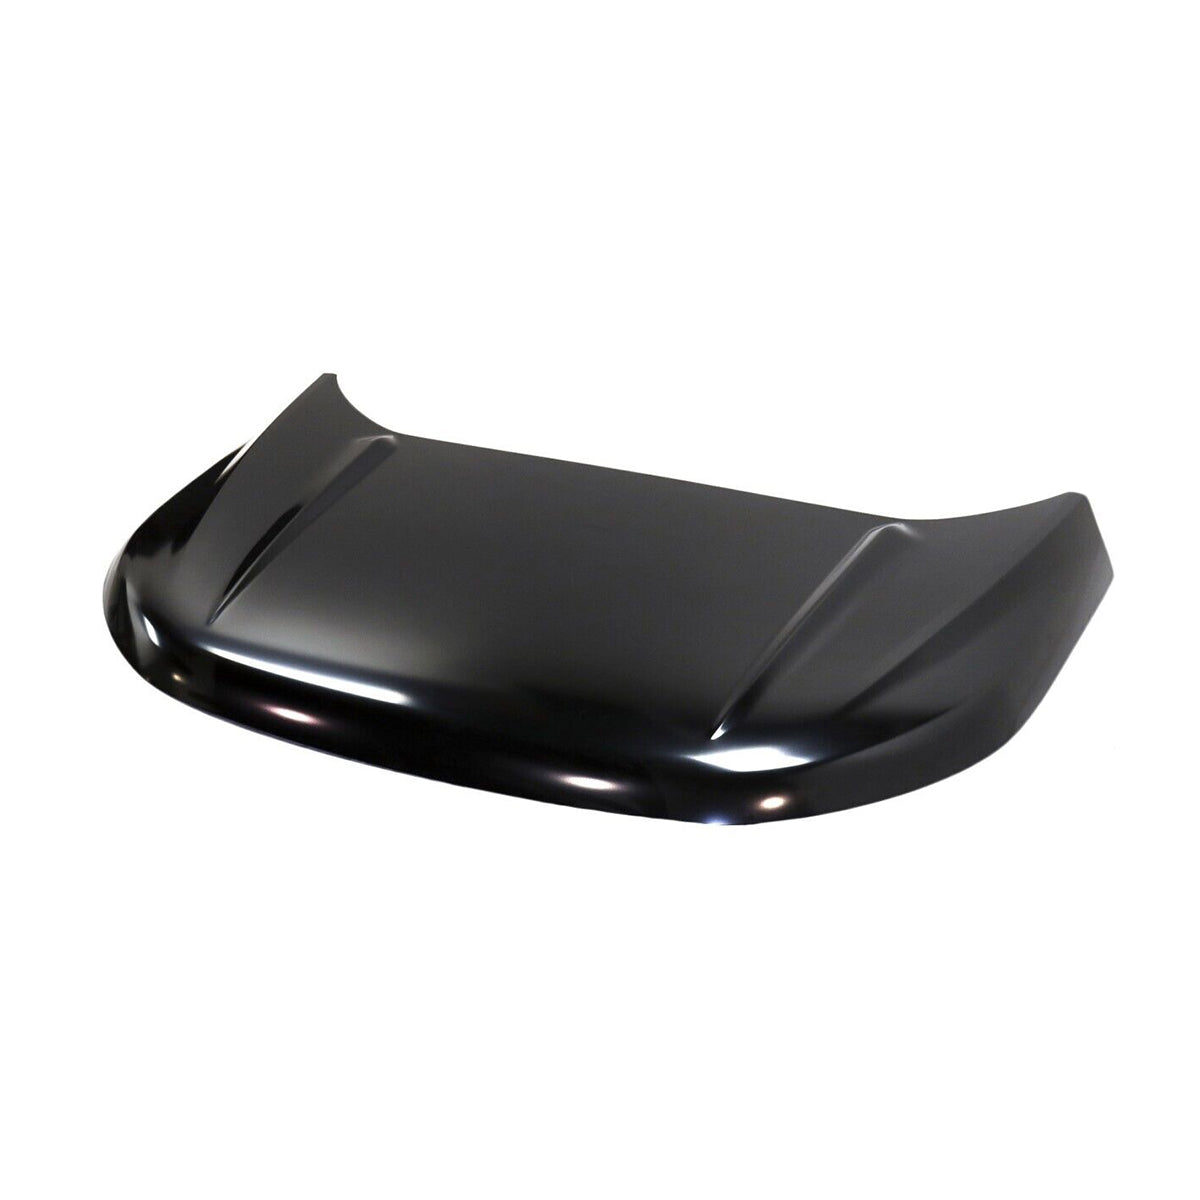 Replacement HOOD, 2015-2018 Ford Edge, FT4Z16612A, (Alum)